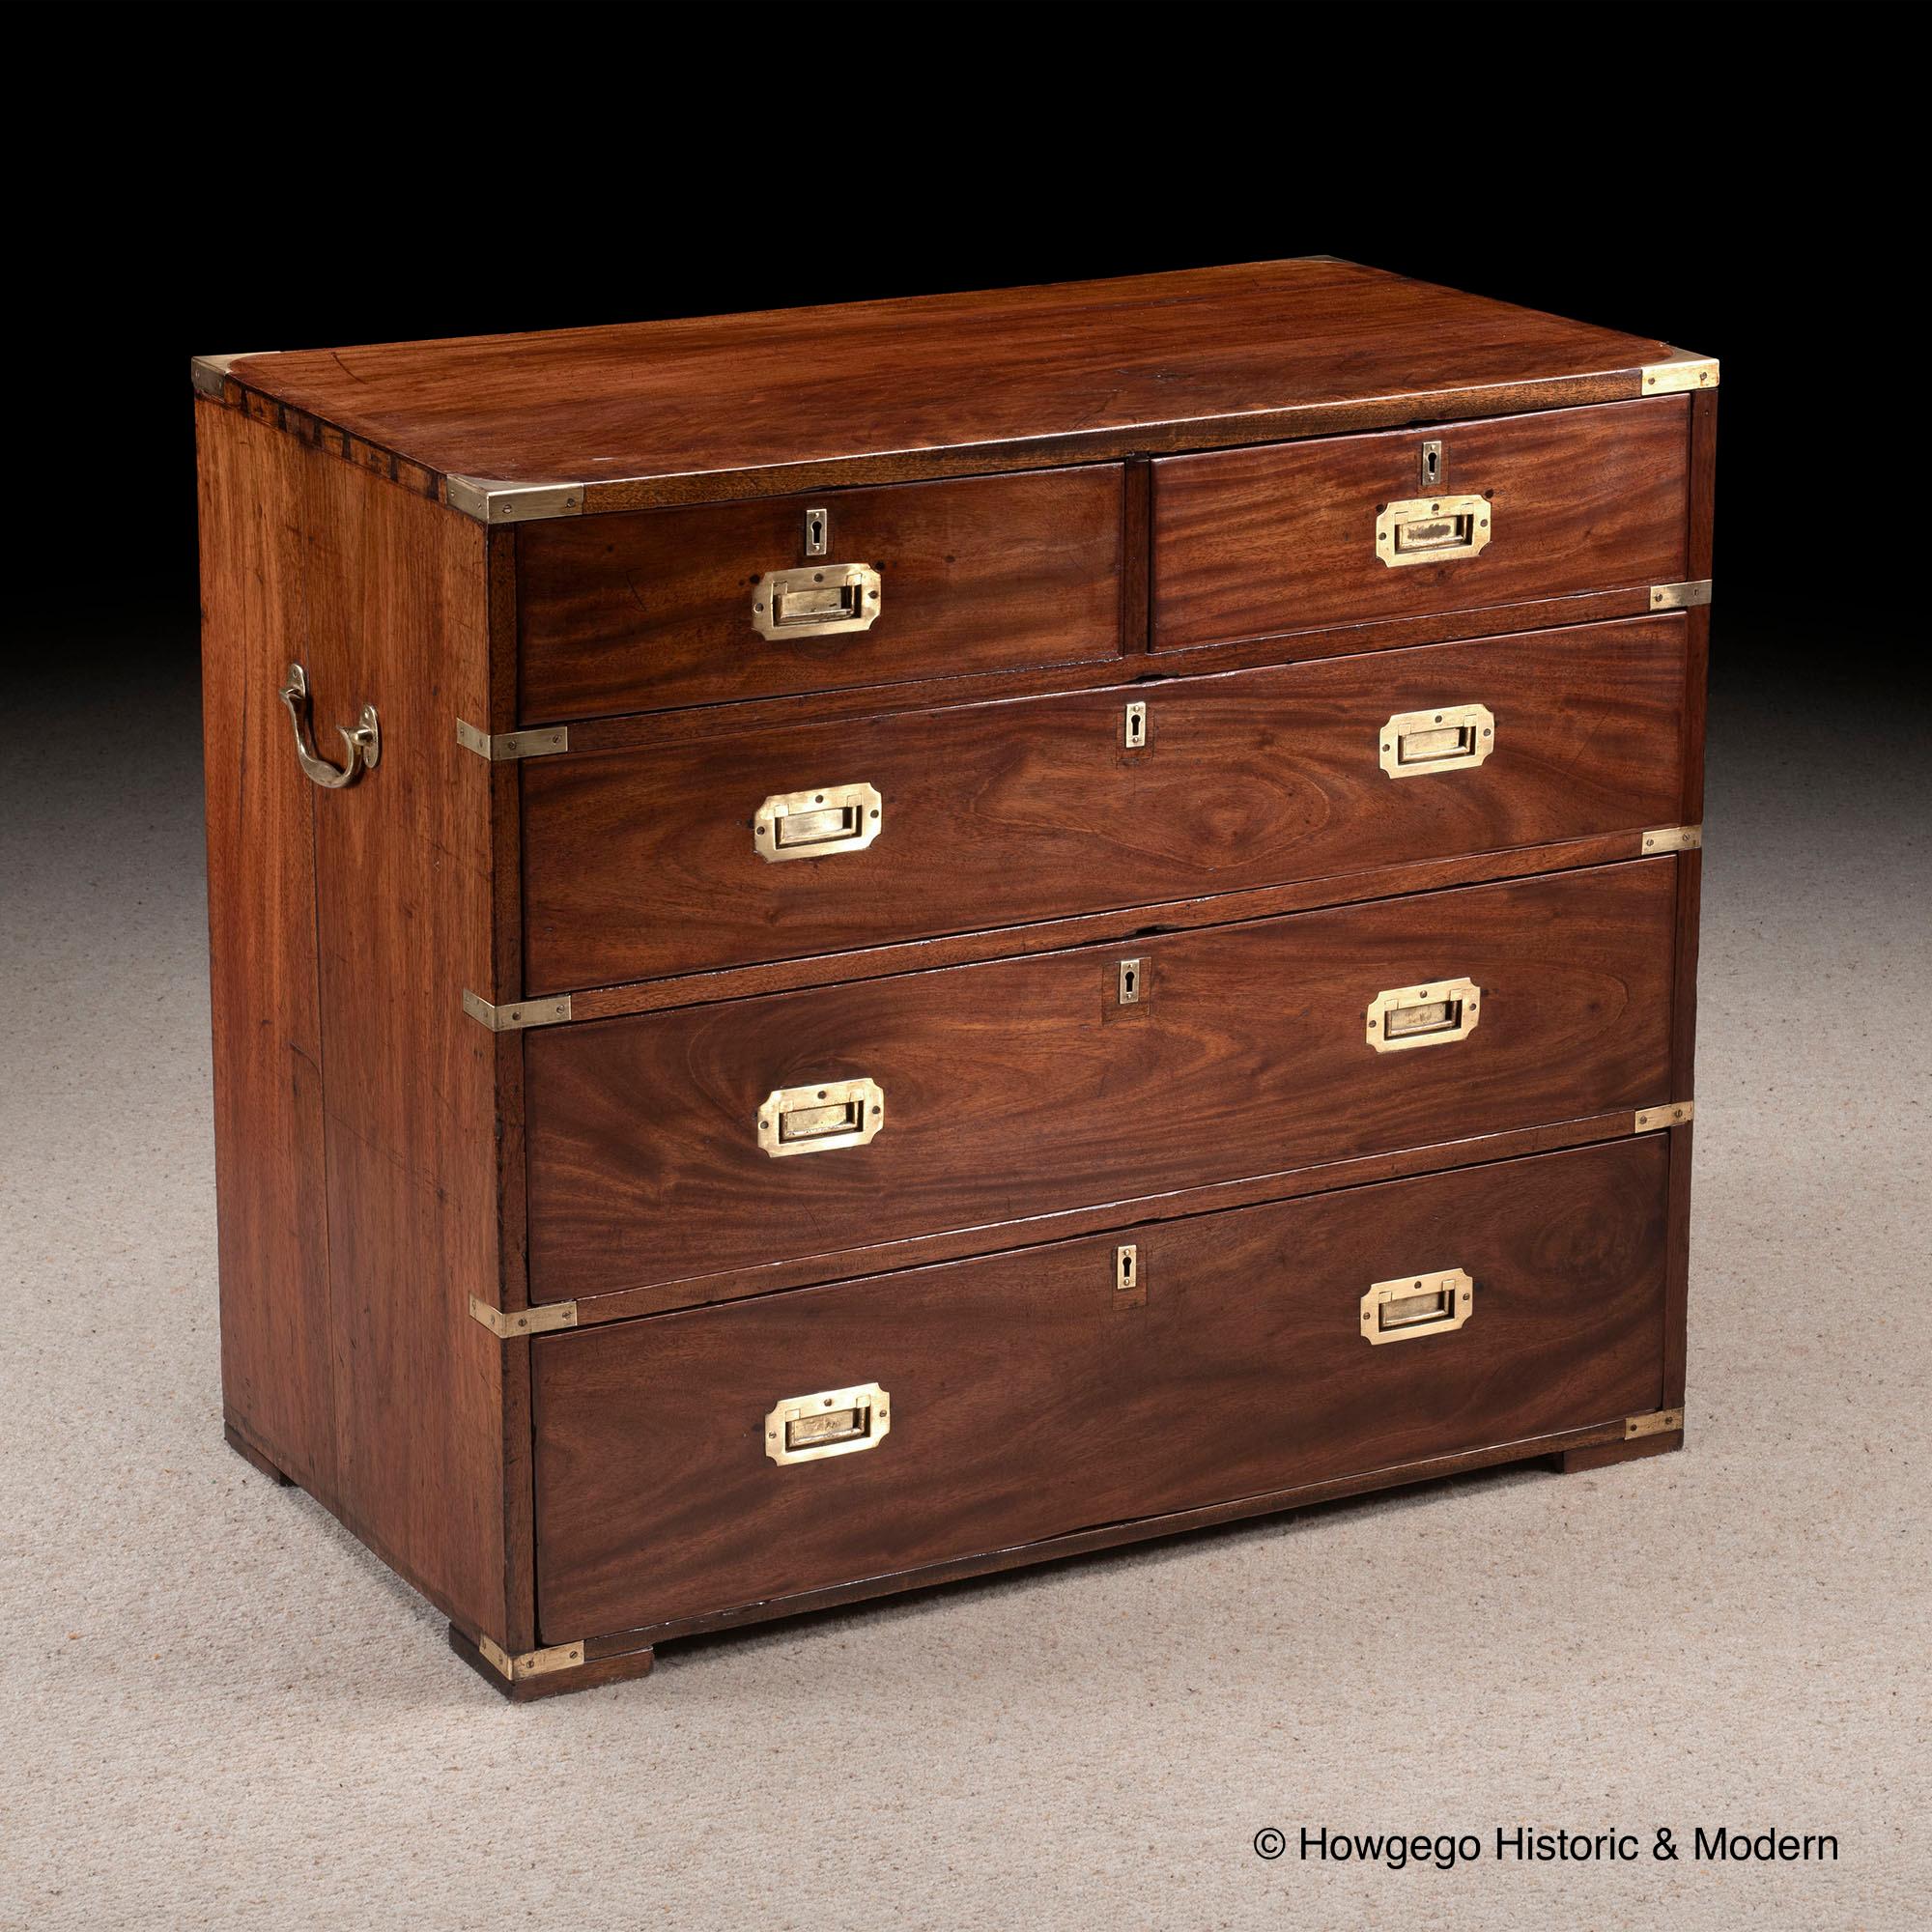 Unusual small size
Striking with the combination of richly coloured mahogany and brass
The veneers on this chest are exceptional, creating the effect of pools of ripples moving down the front
Lovely patina
